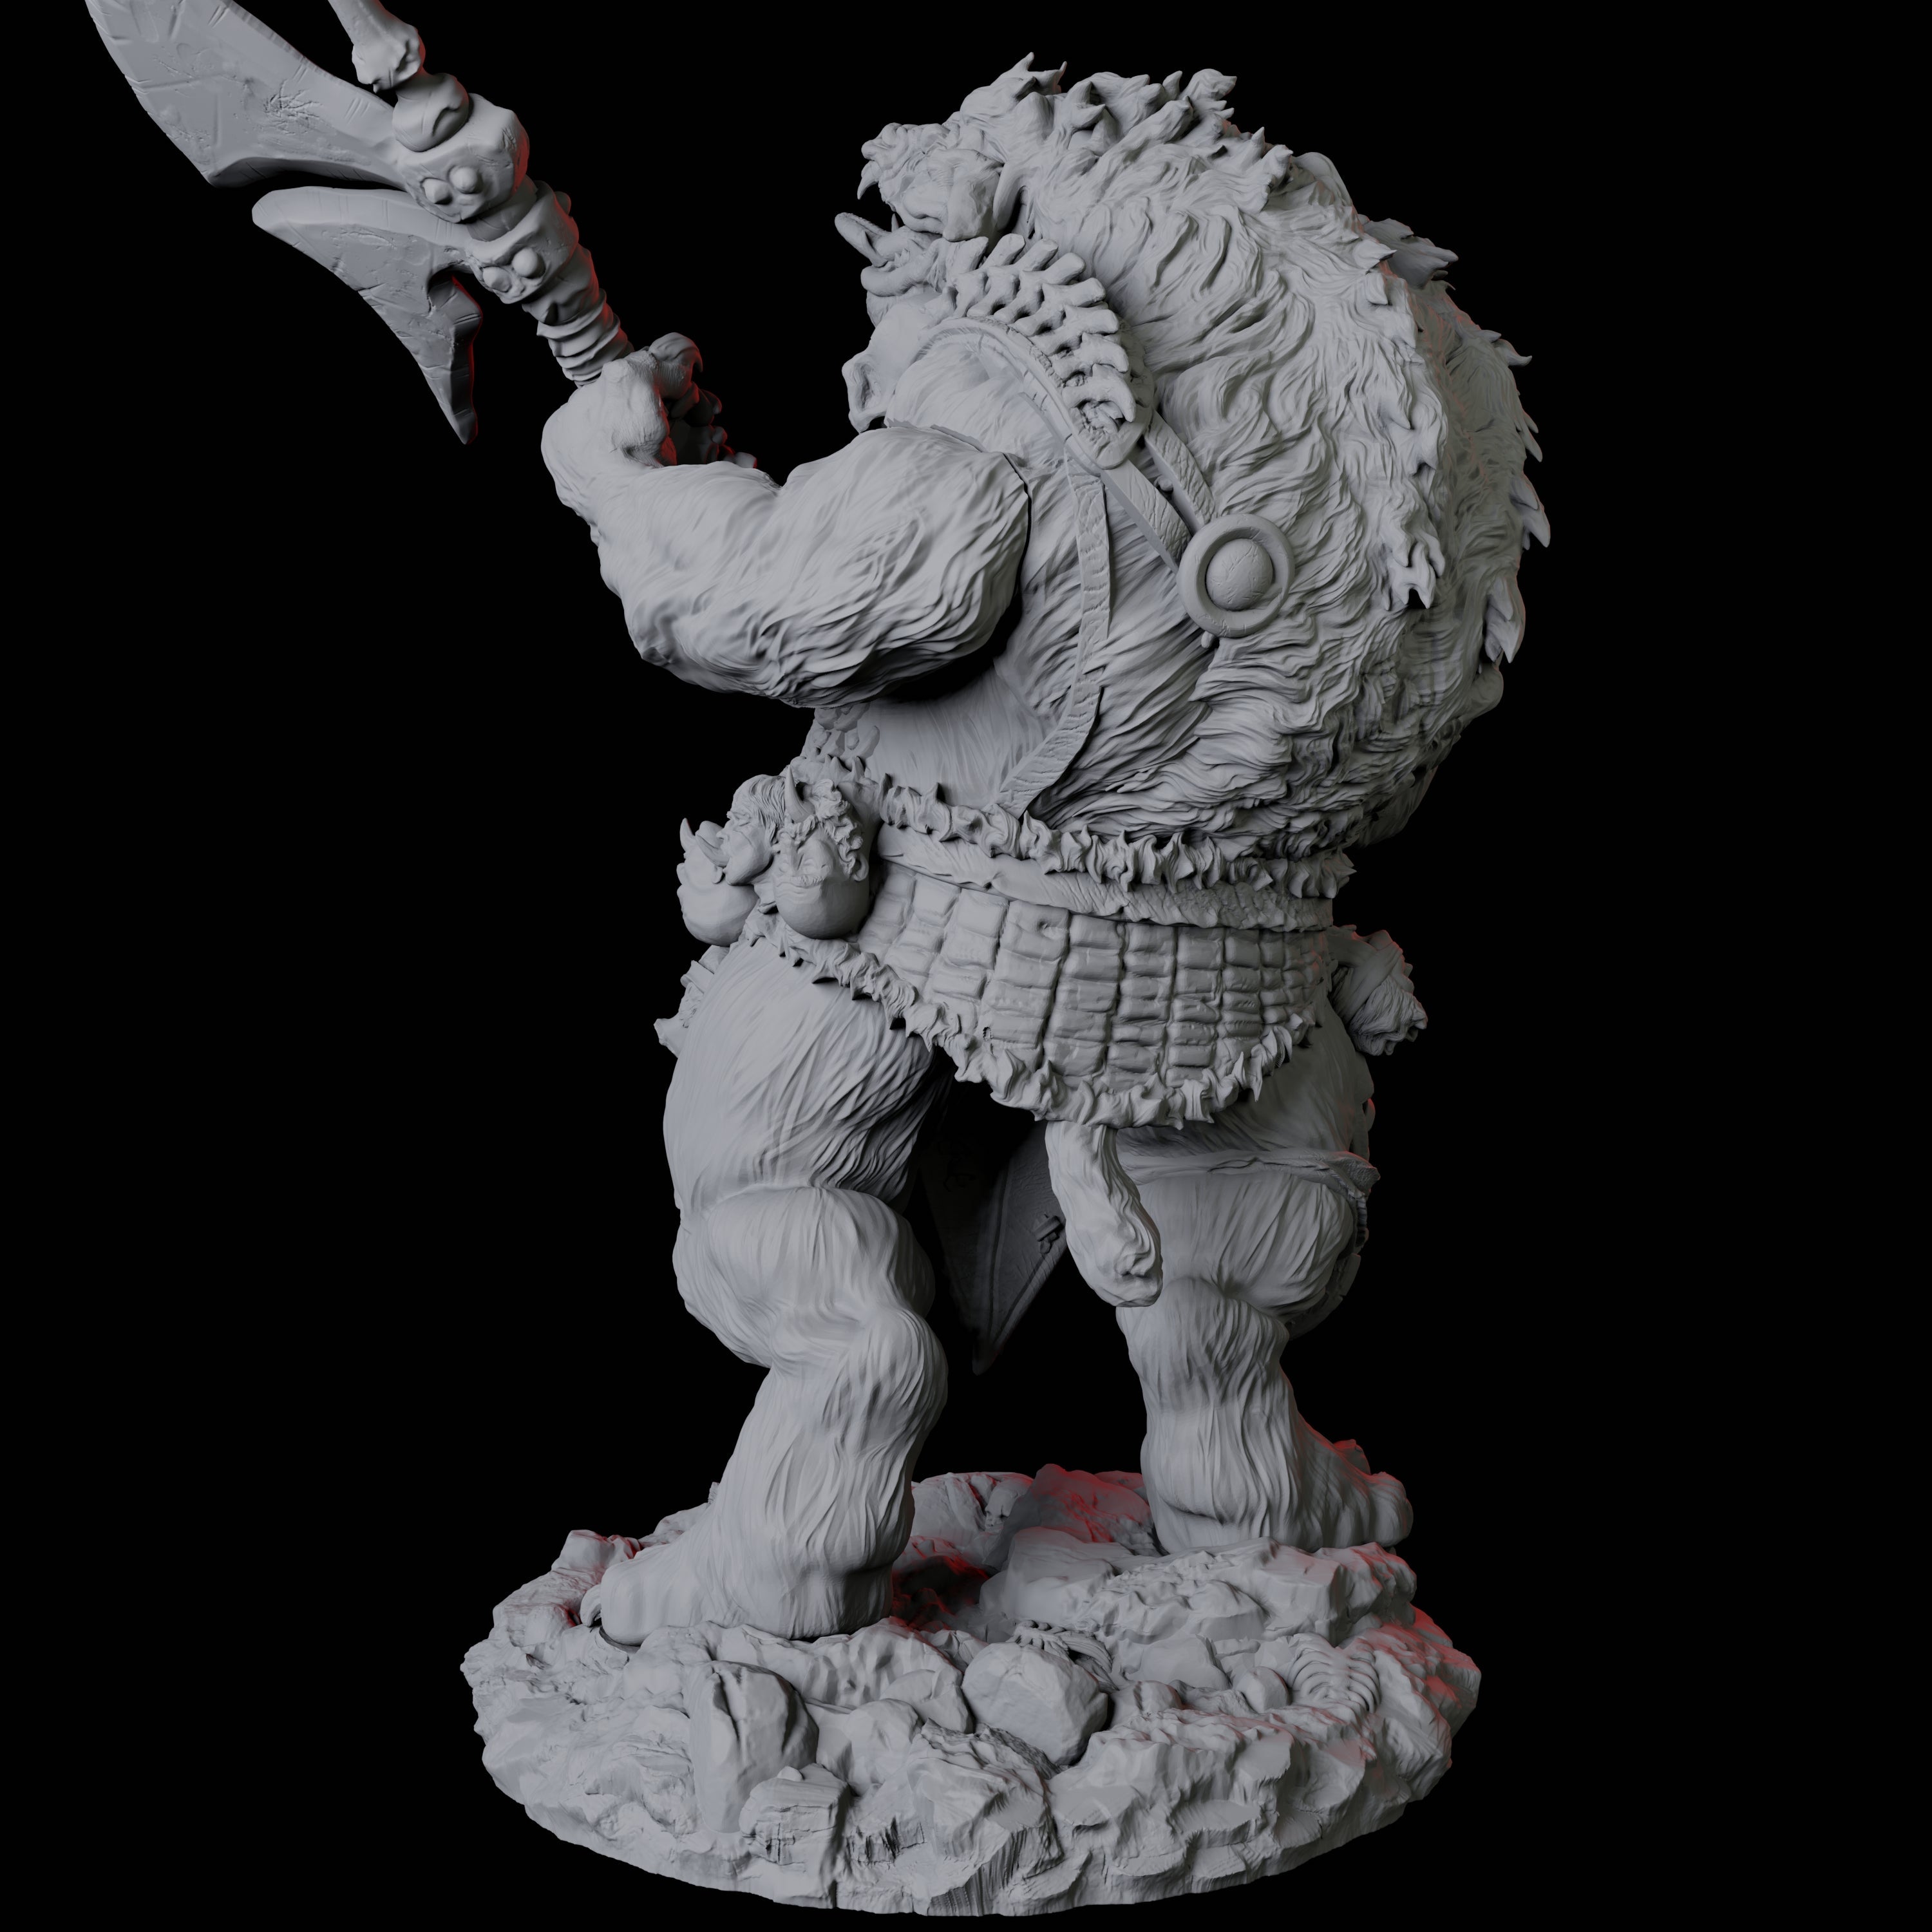 Gnoll Ettin A Miniature for Dungeons and Dragons, Pathfinder or other TTRPGs